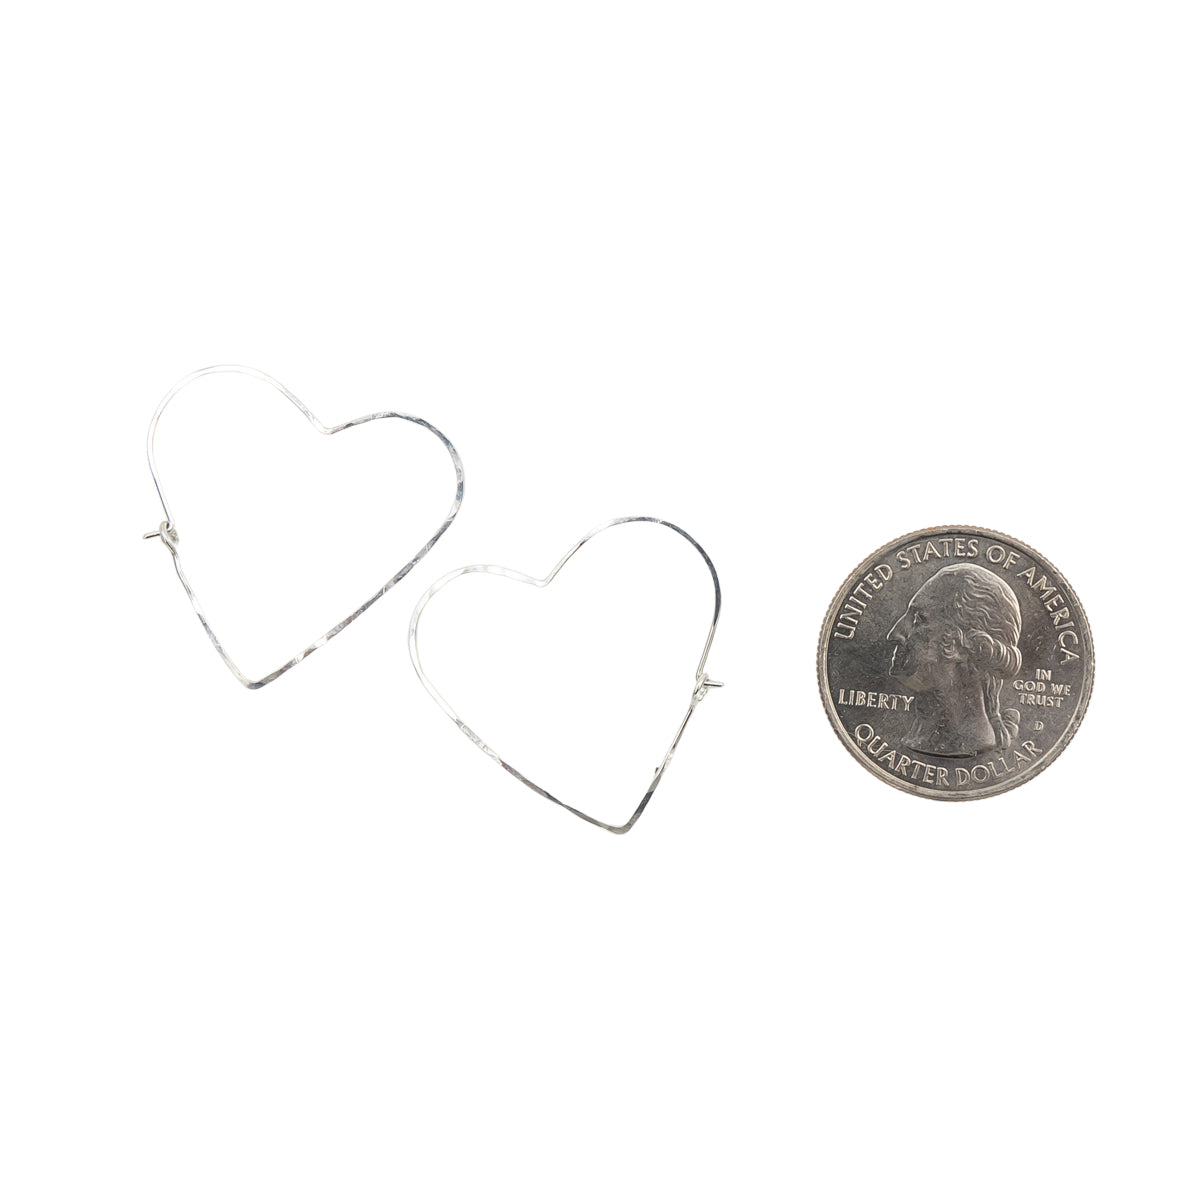 Earth Song Jewelry Handmade Sterling Silver Heart Hoops Earrings sizing context